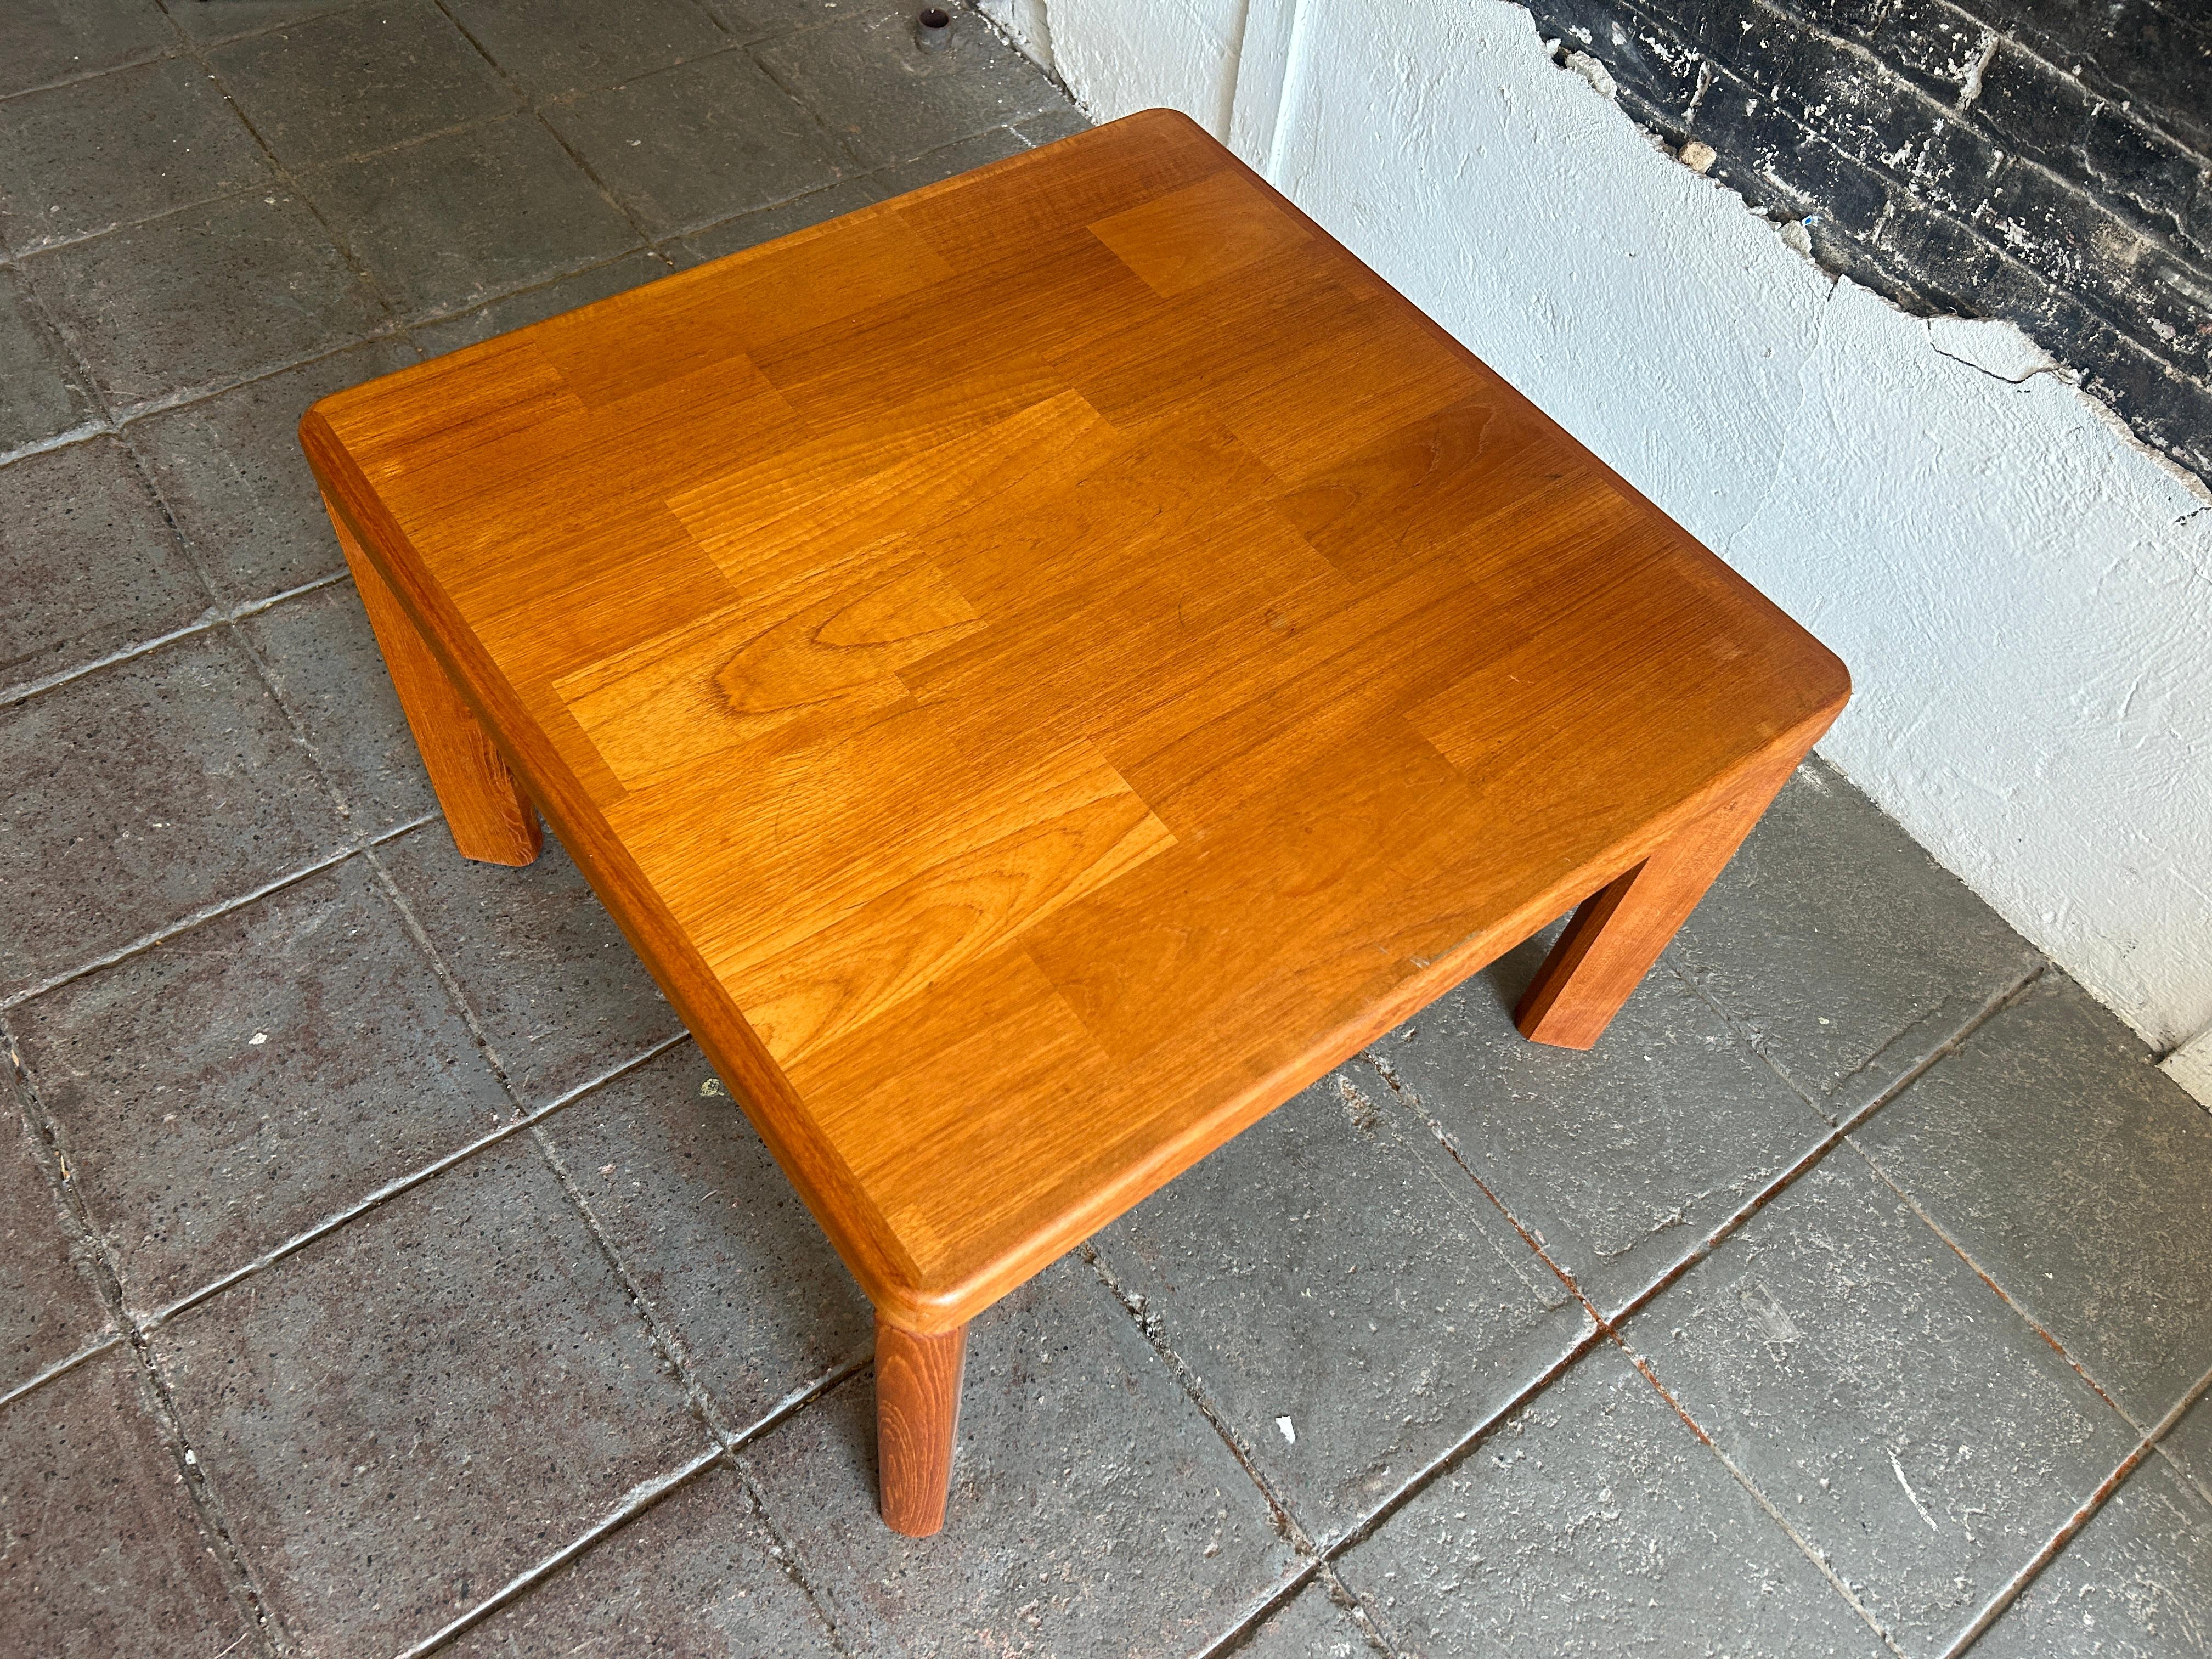 Mid century Danish modern teak 30” square coffee table - Legs unbolt. Very clean all around. Beautiful teak wood coffee table. No labels. Located in Brooklyn NYC.

(2) matching tables available 